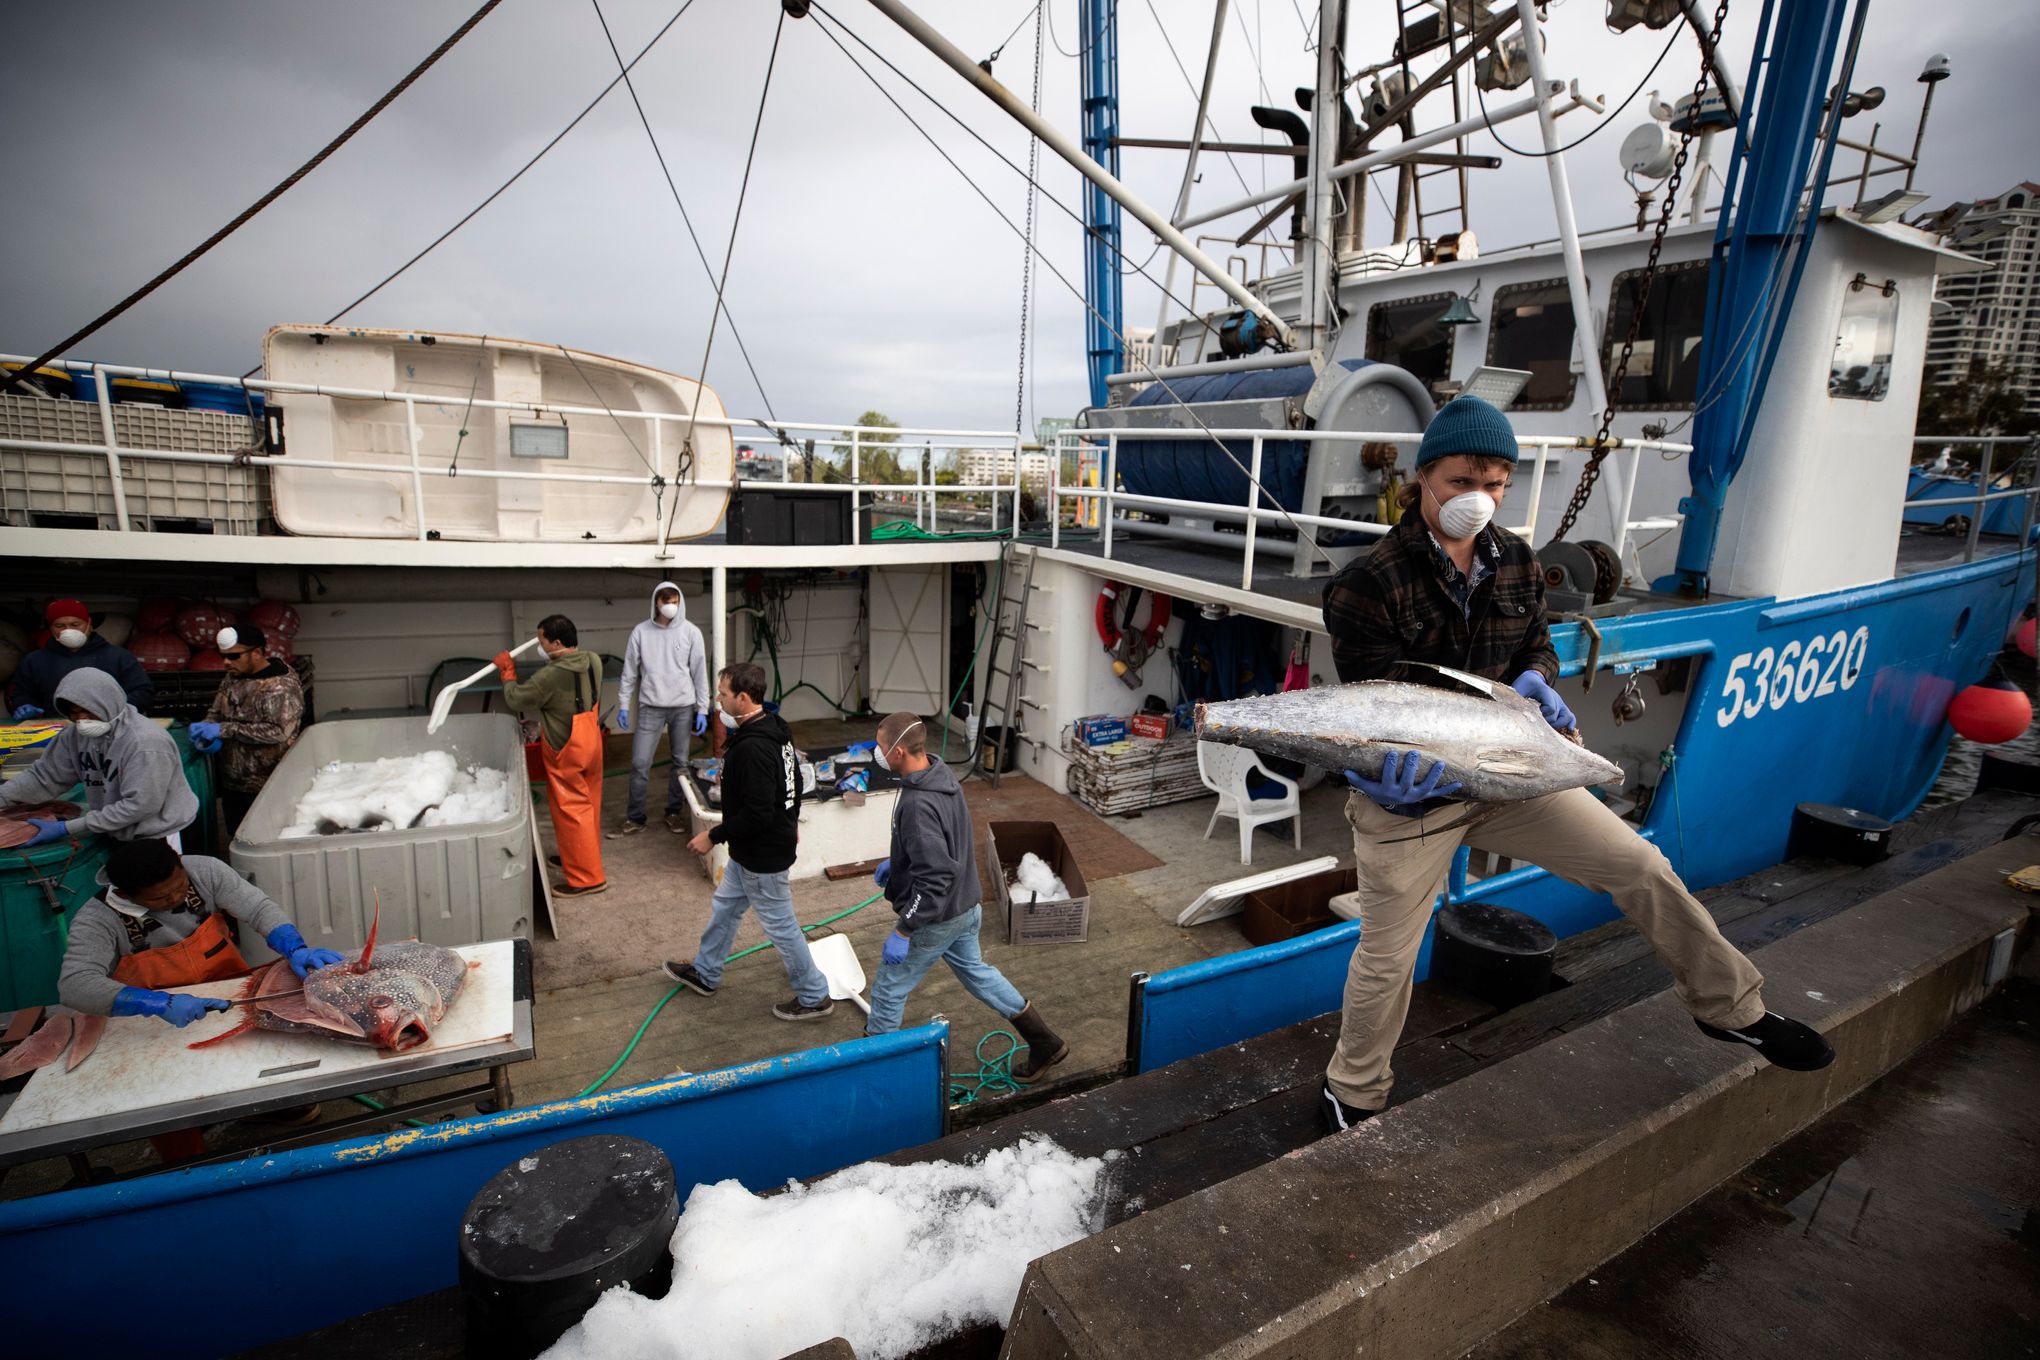 At sea during pandemic, tuna fishermen return to stormy times